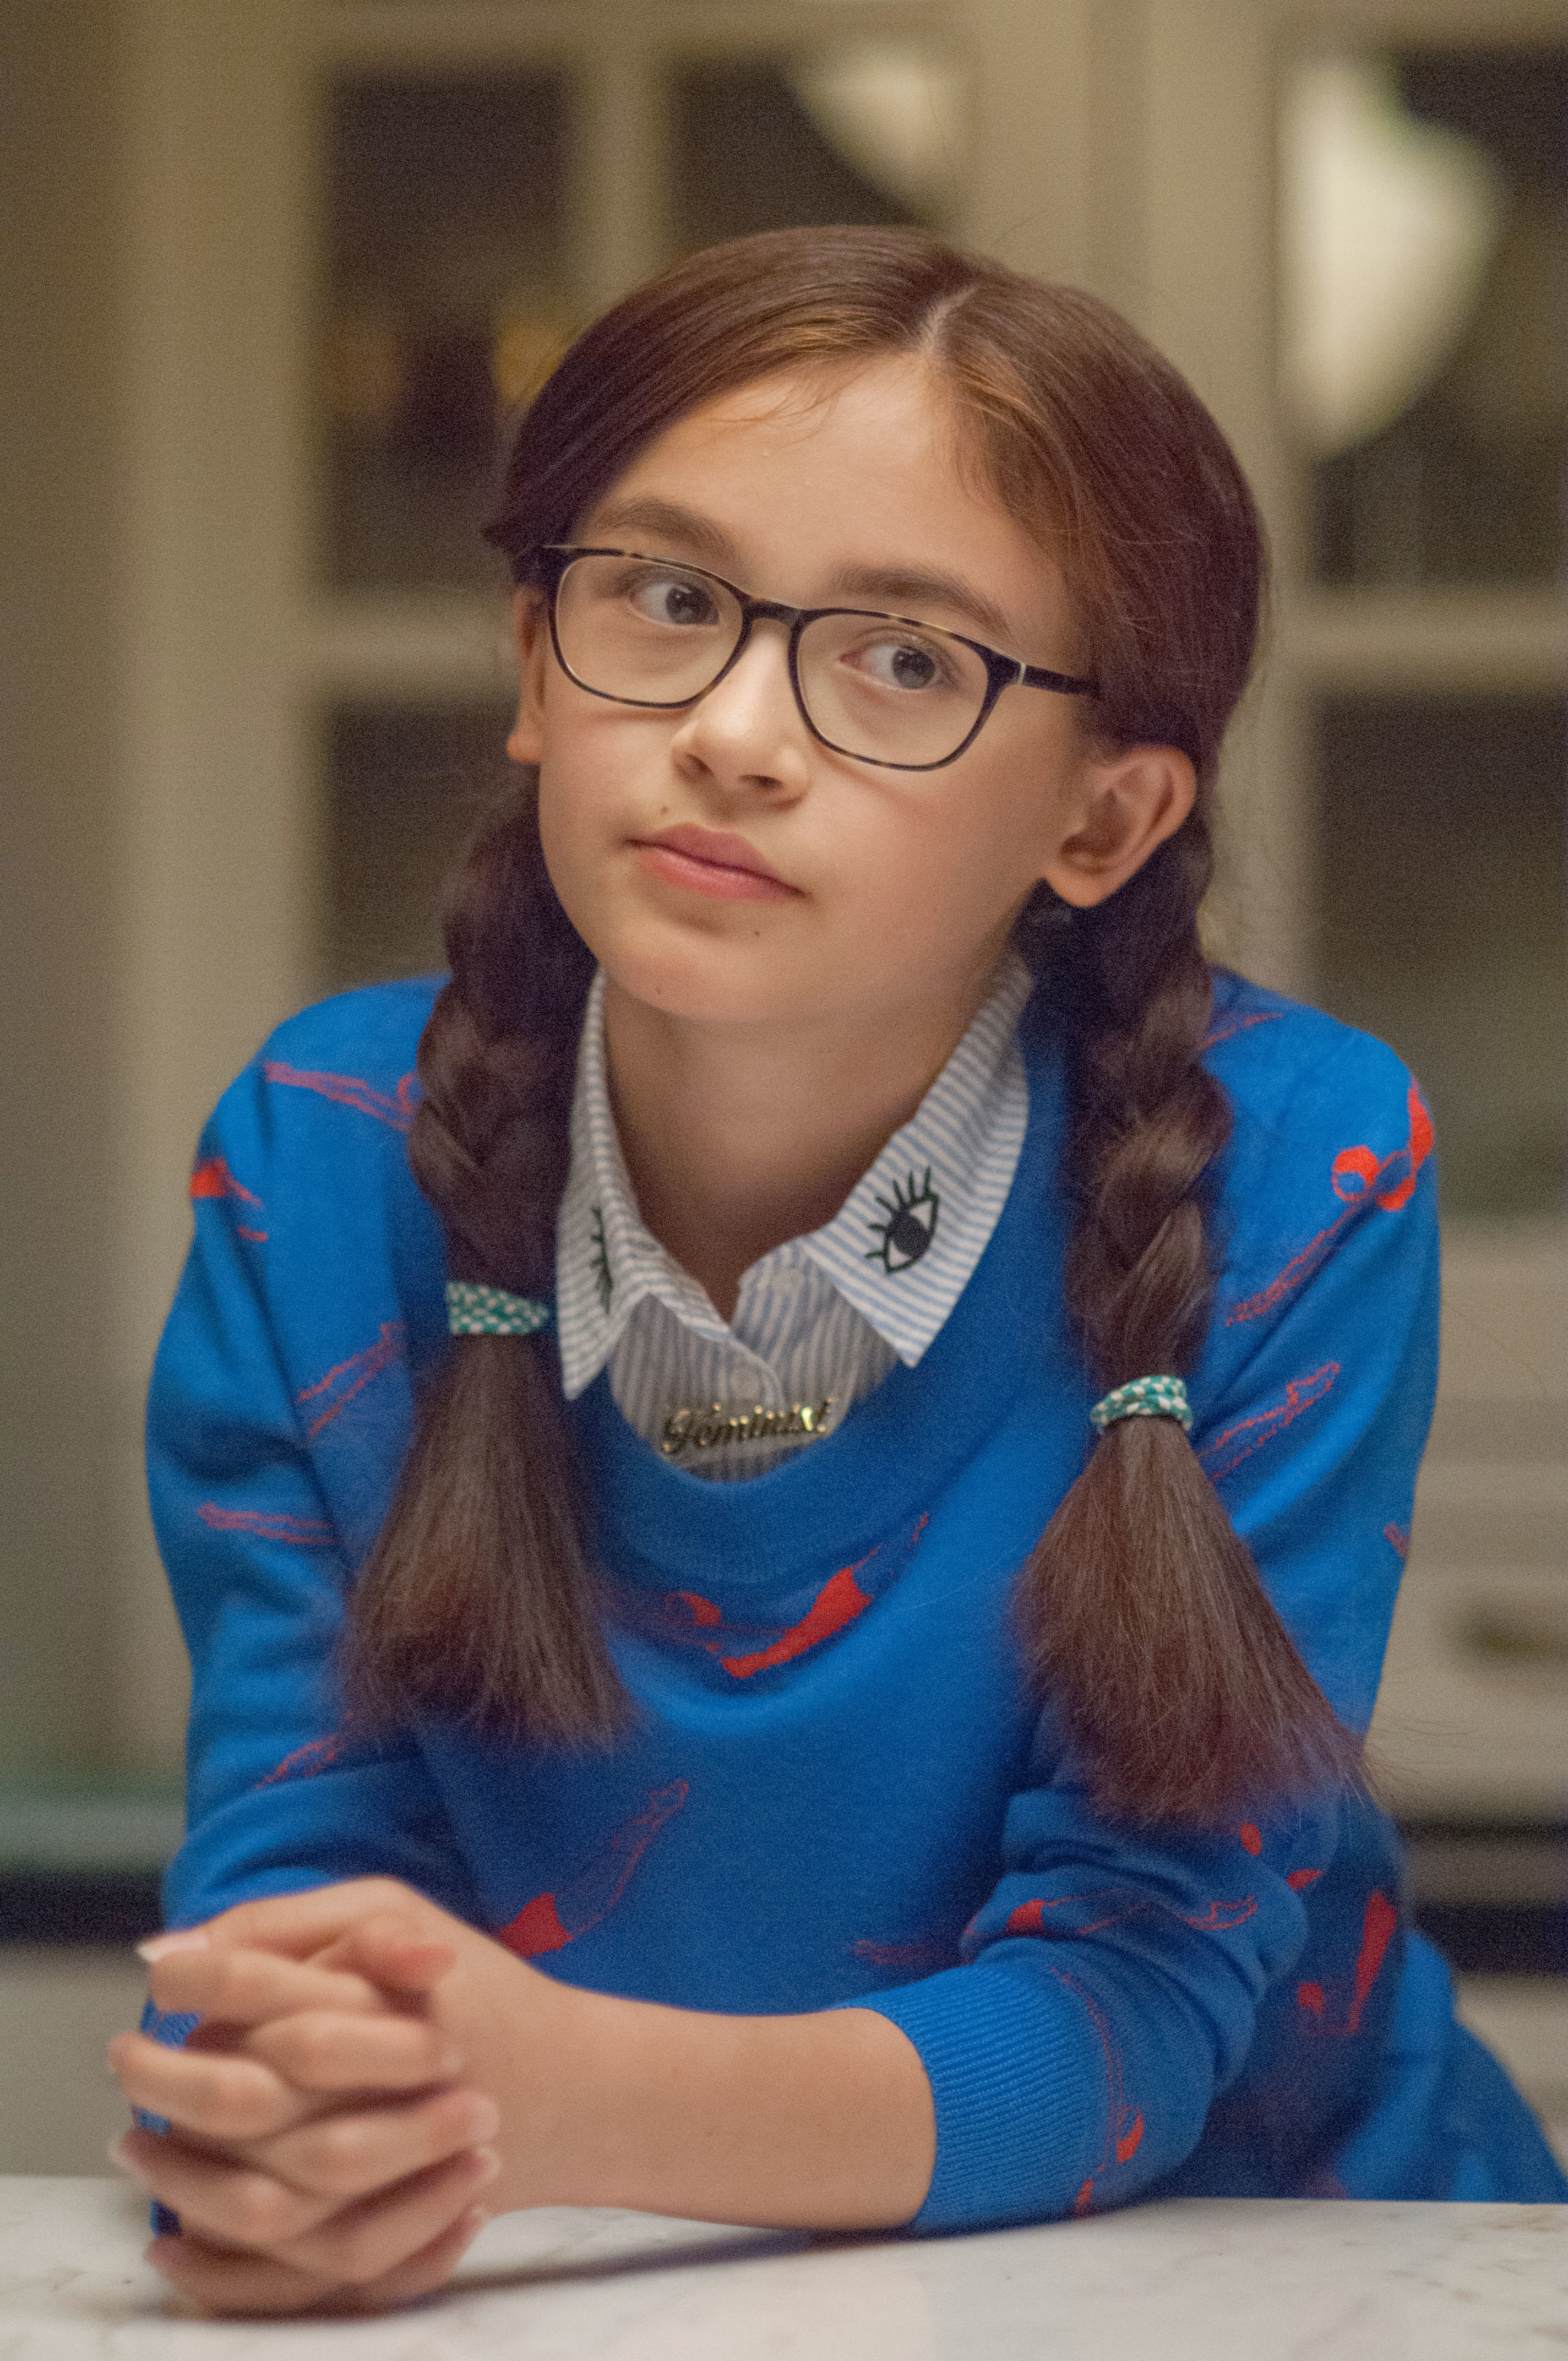 Girl with braided hair and glasses, wearing a sweater, looking thoughtful